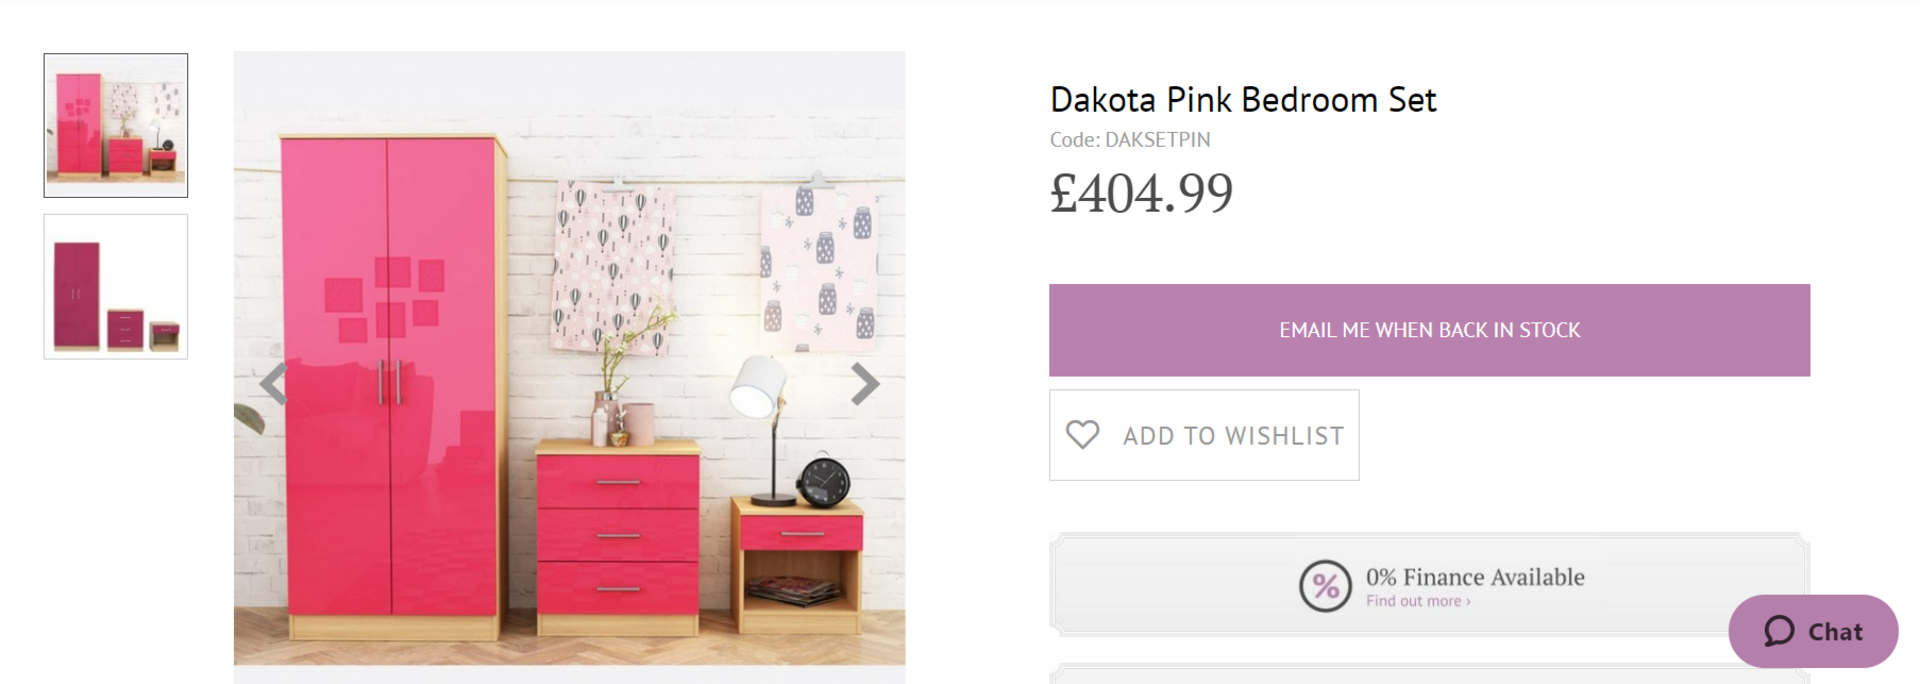 NEW BOXED 3 Piece Dakota Pink Bedroom Set. RRP £404.99. Made From MDF High Class Contemporary Style. - Image 2 of 2